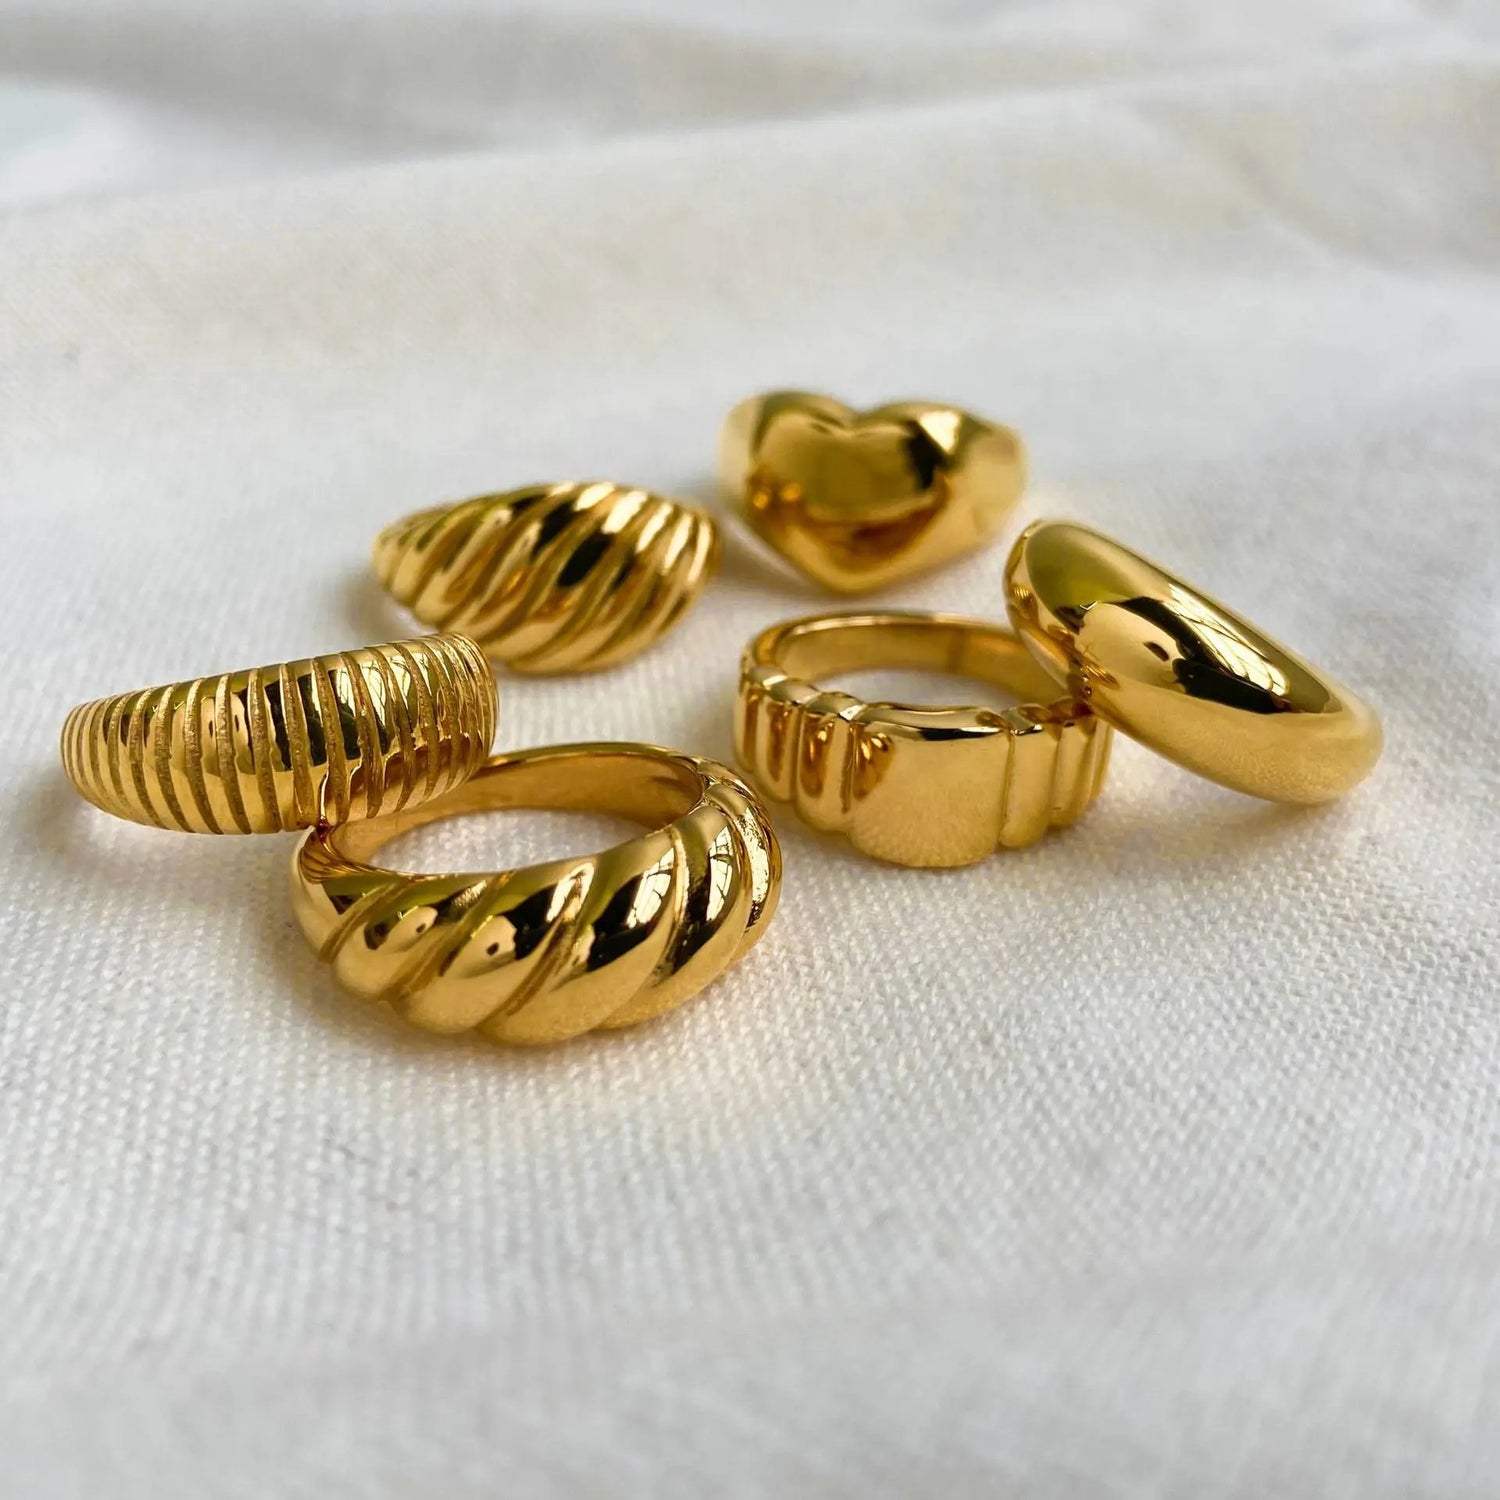 Beautiful gold rings on a white ceramic dish